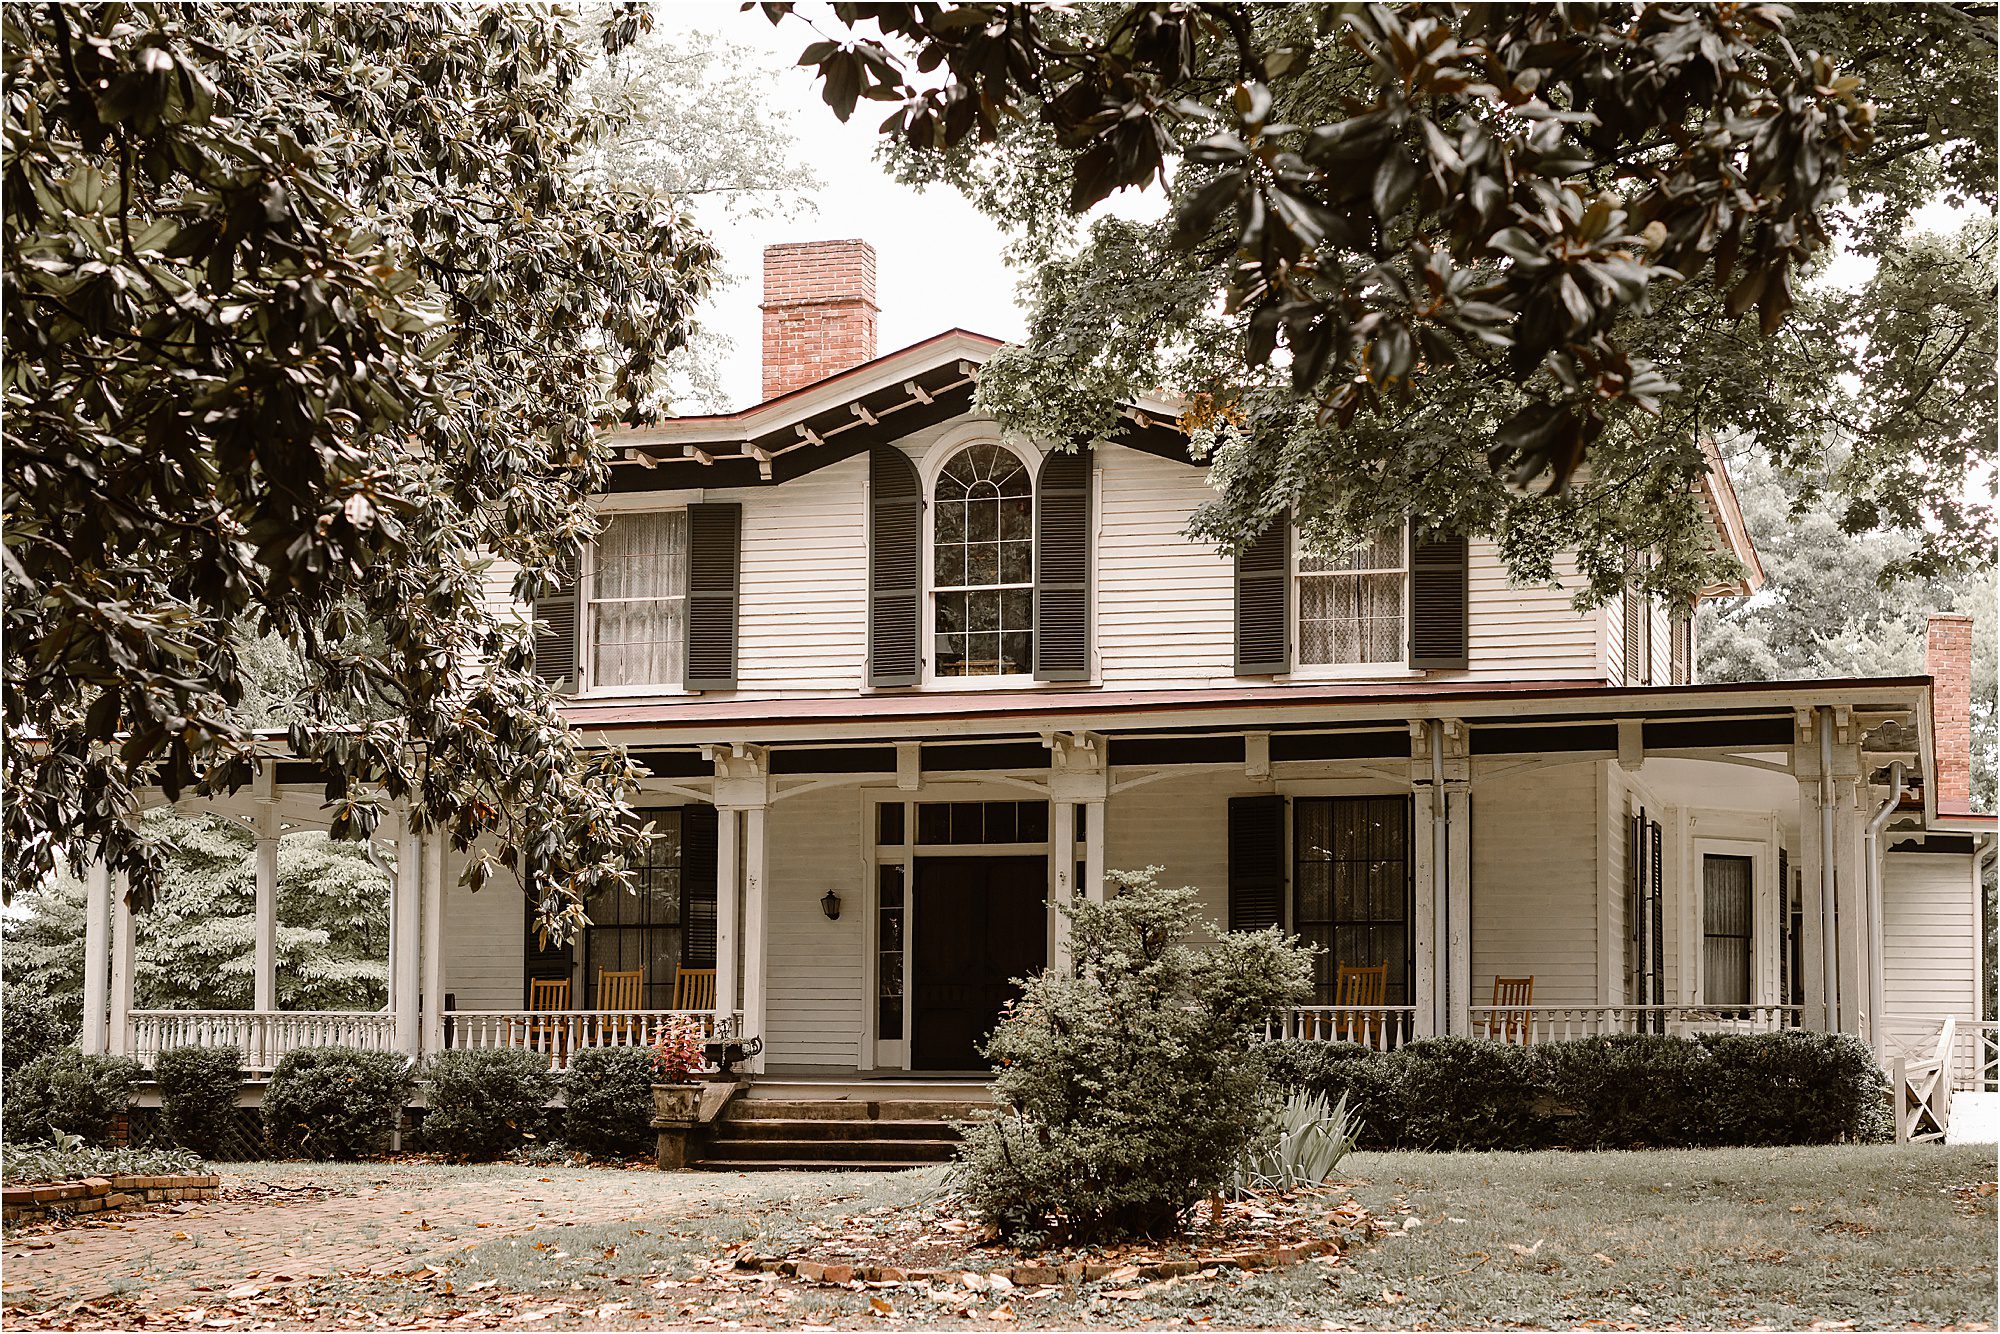 Mabry-Hazen House in Knoxville, Tennessee